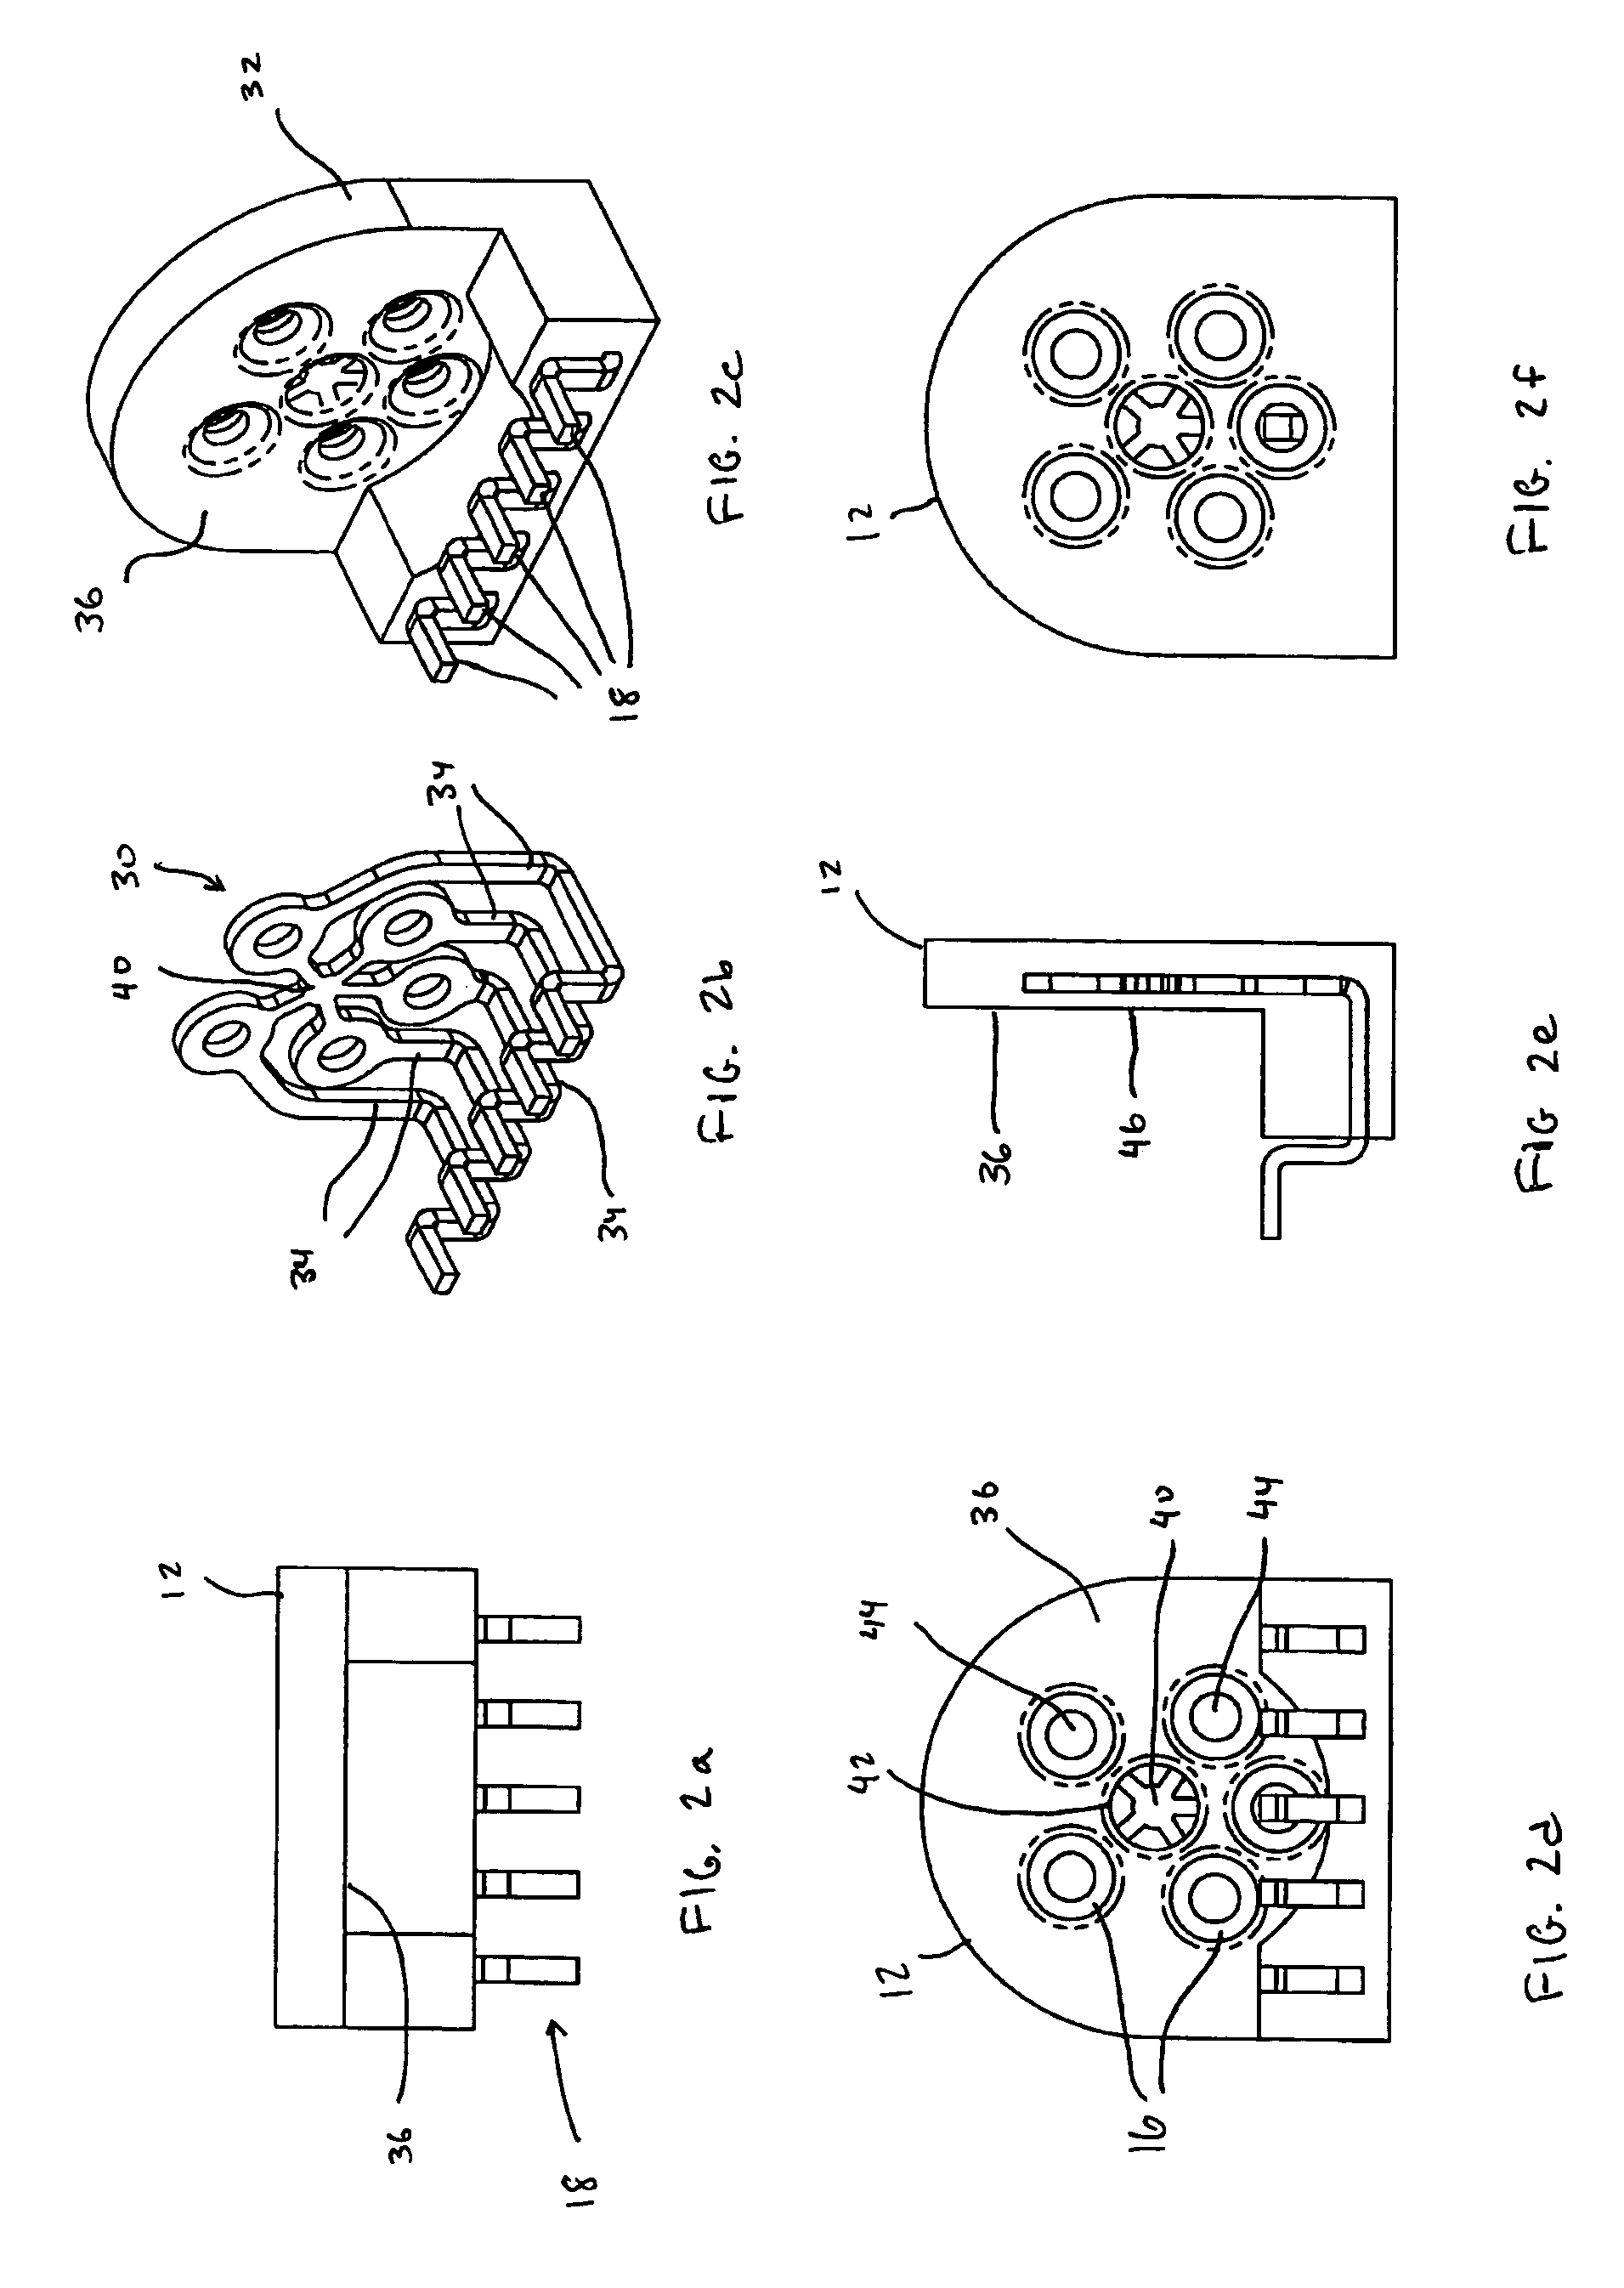 Lead frame for connecting optical sub-assembly to printed circuit board